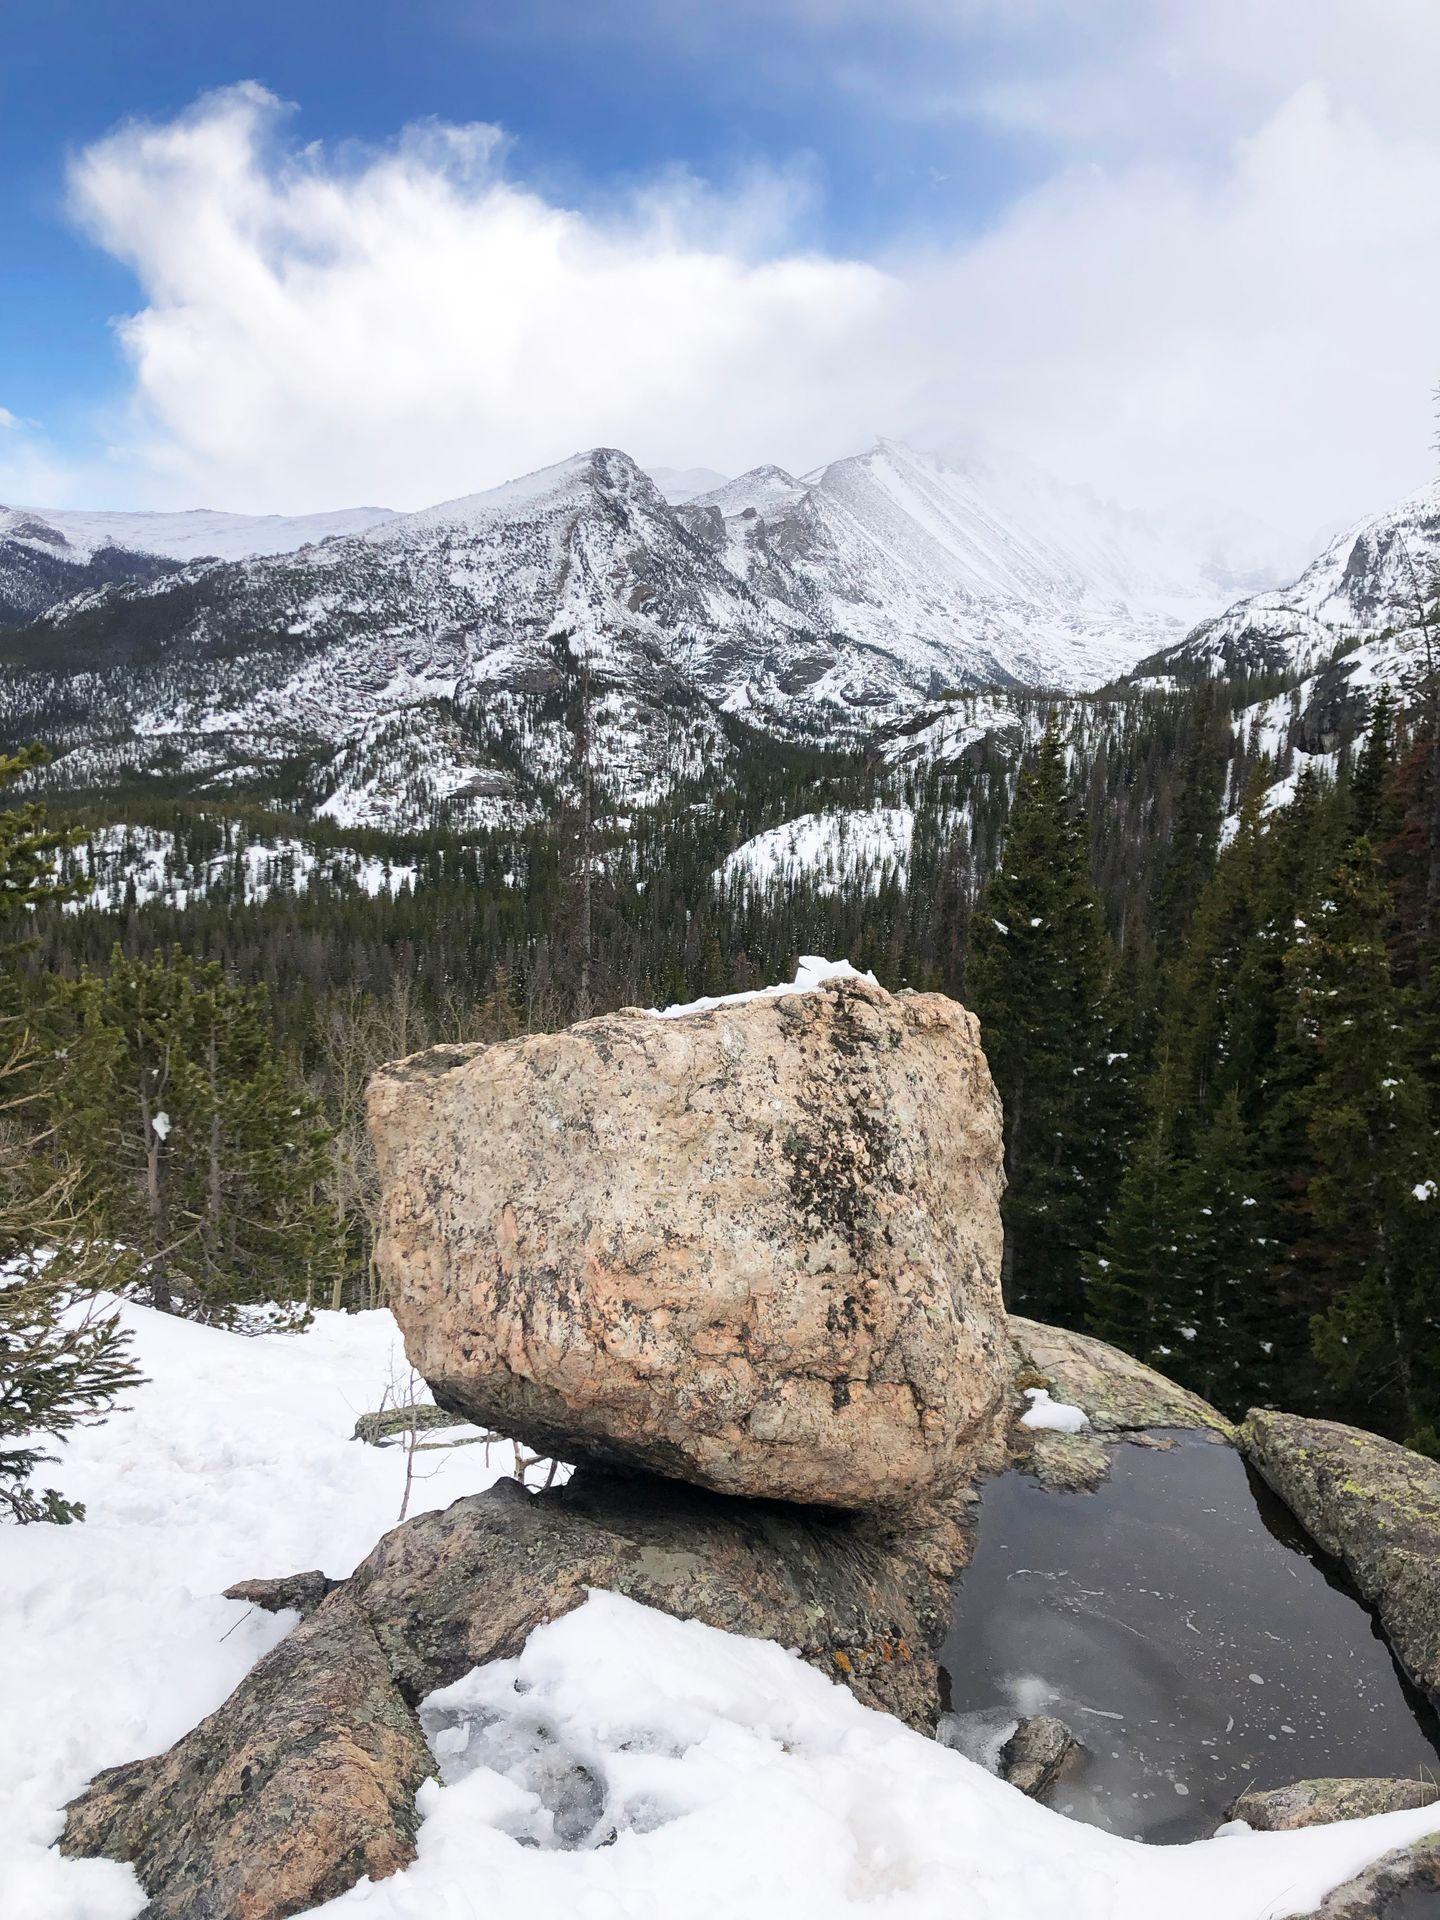 A pile of boulders covered in some snow with snowy mountains in the distance.